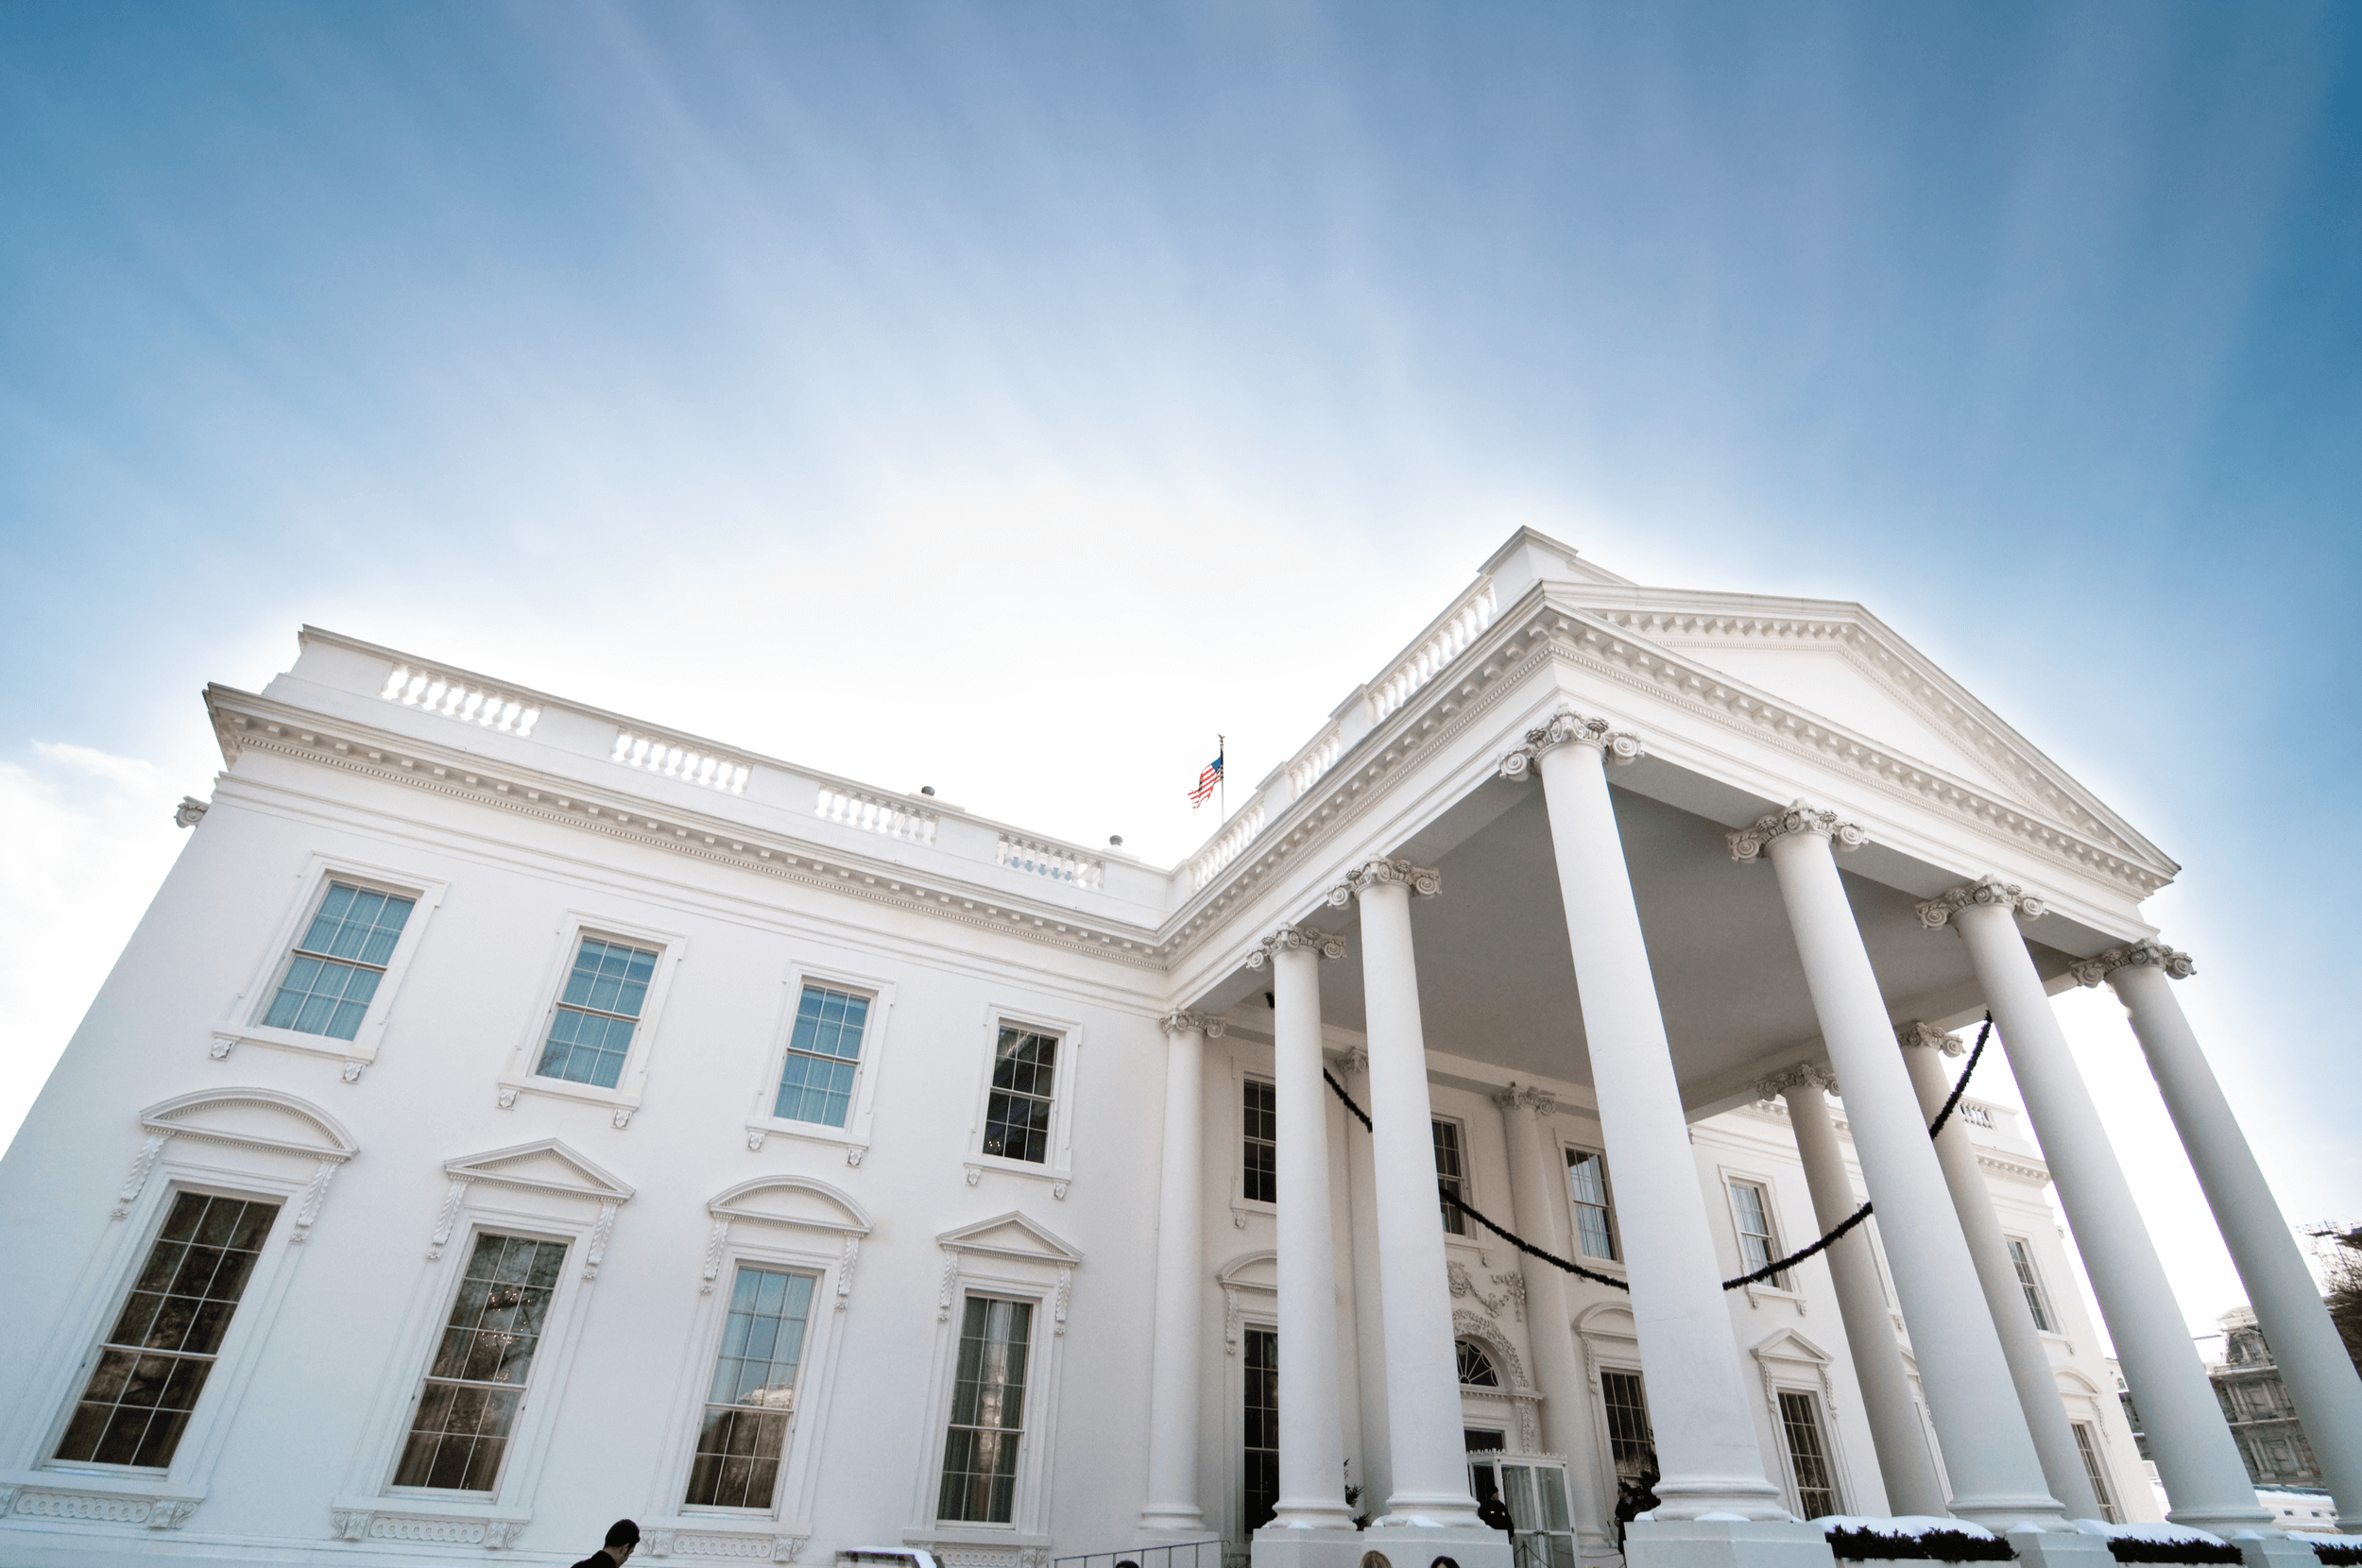 The North Portico of the White House in Washington, D.C.